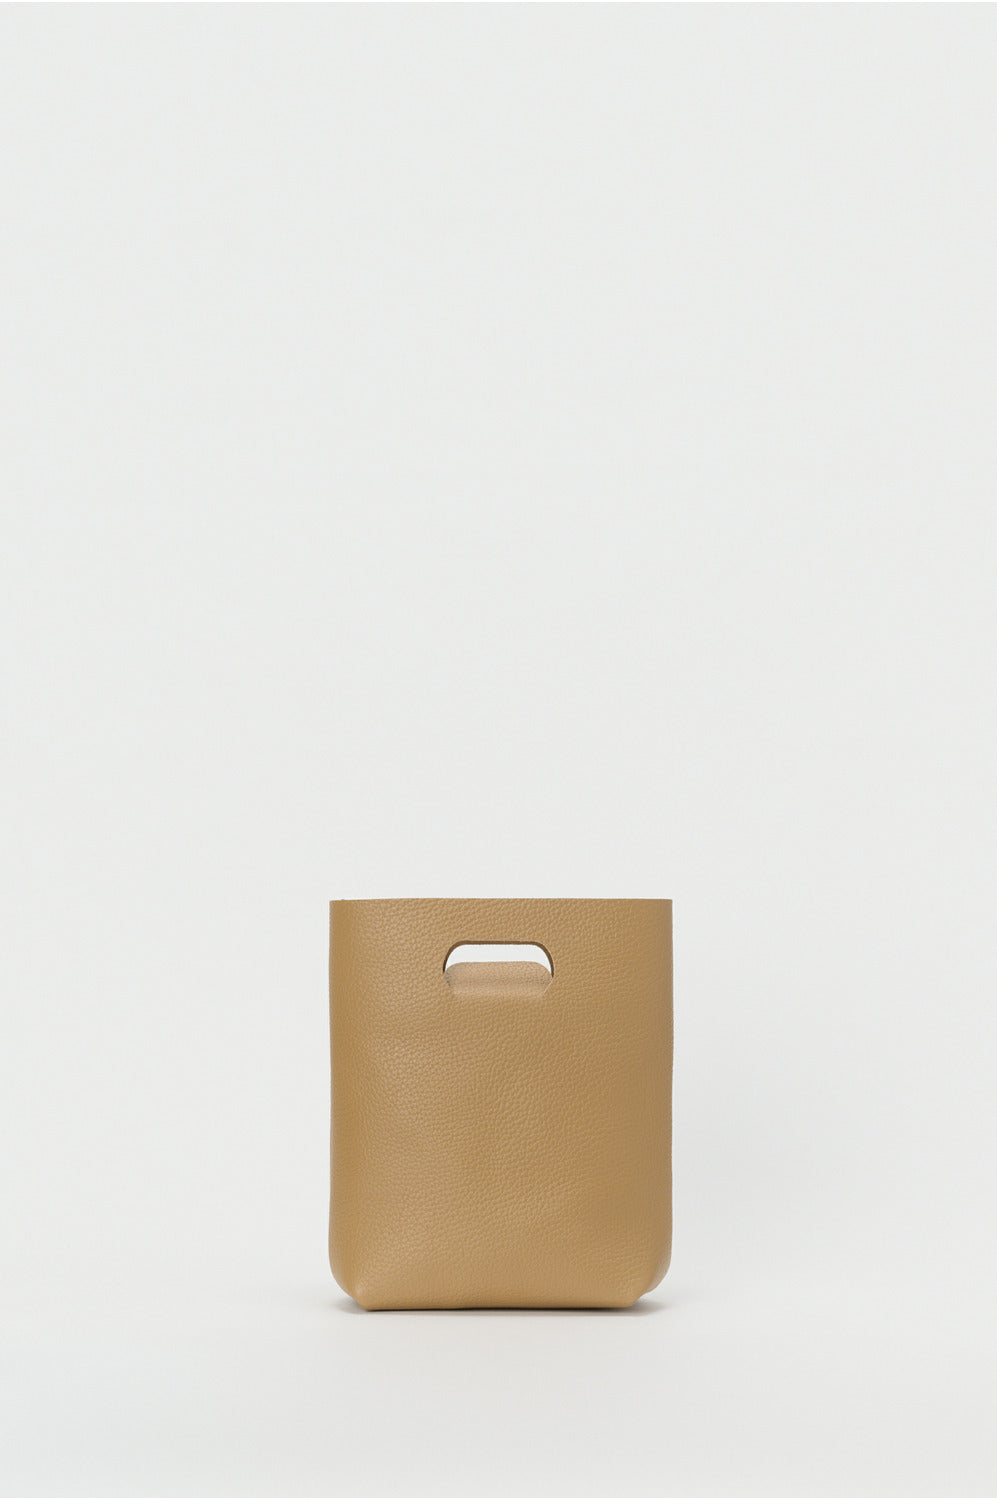 Hender Scheme not eco bag small – unexpected store